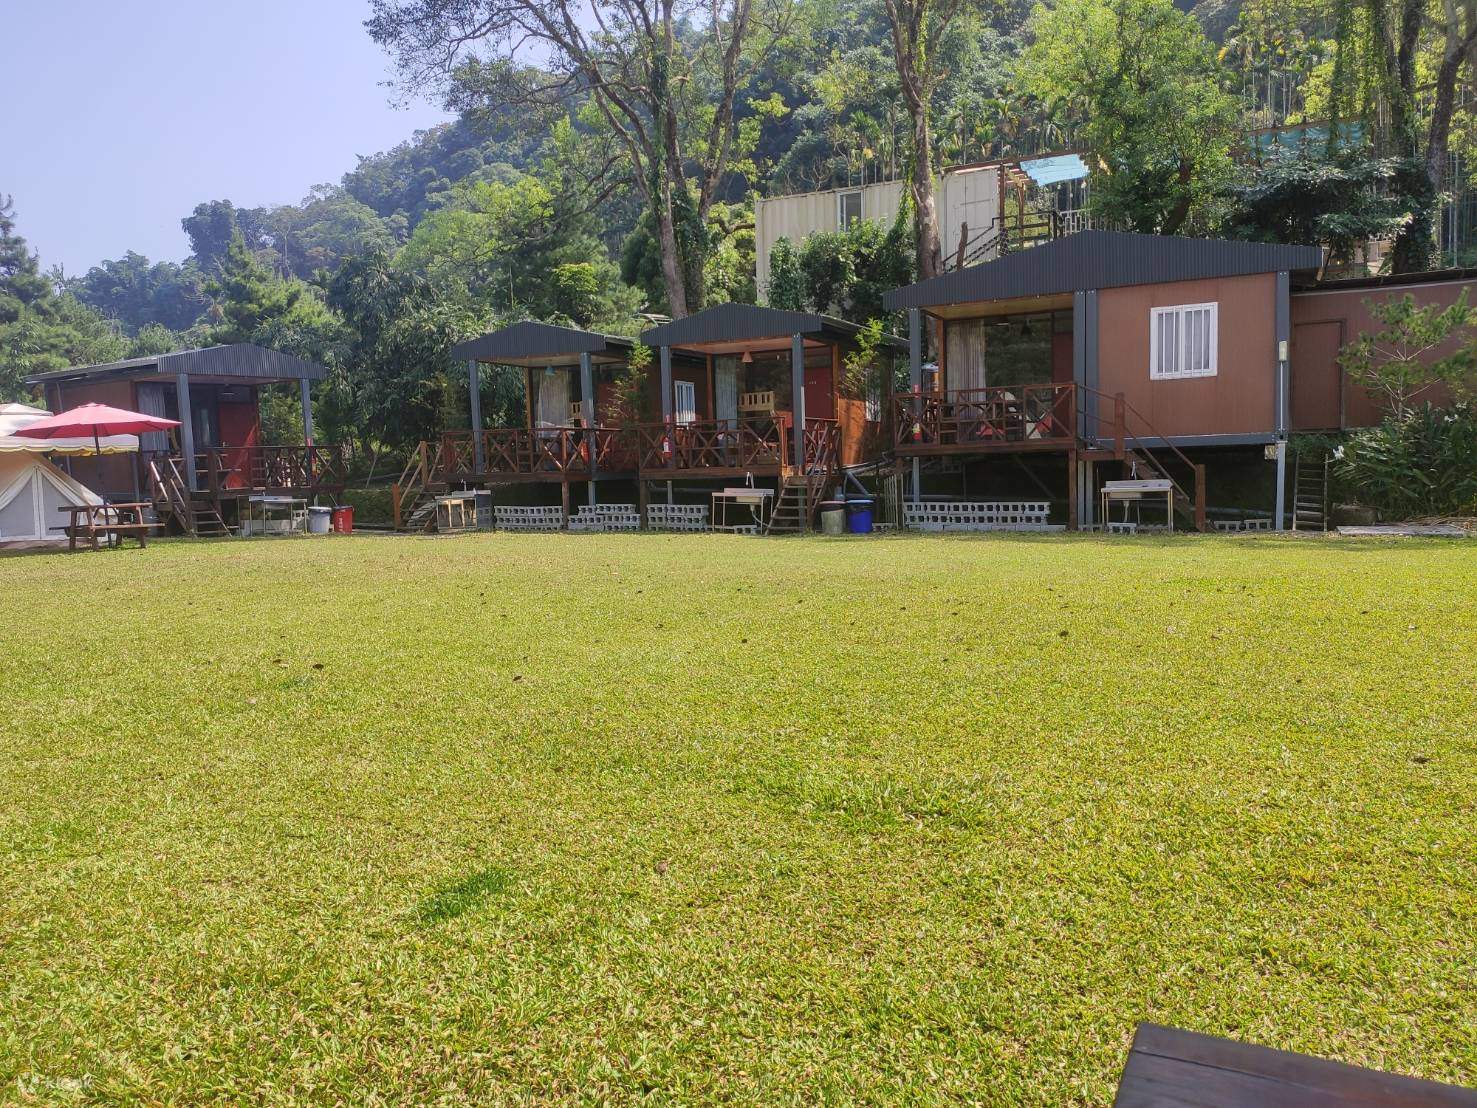 Camping　Klook　Nantou　Camping　Xipan　Hut　Tent　Area　Free　States　Lazy　United